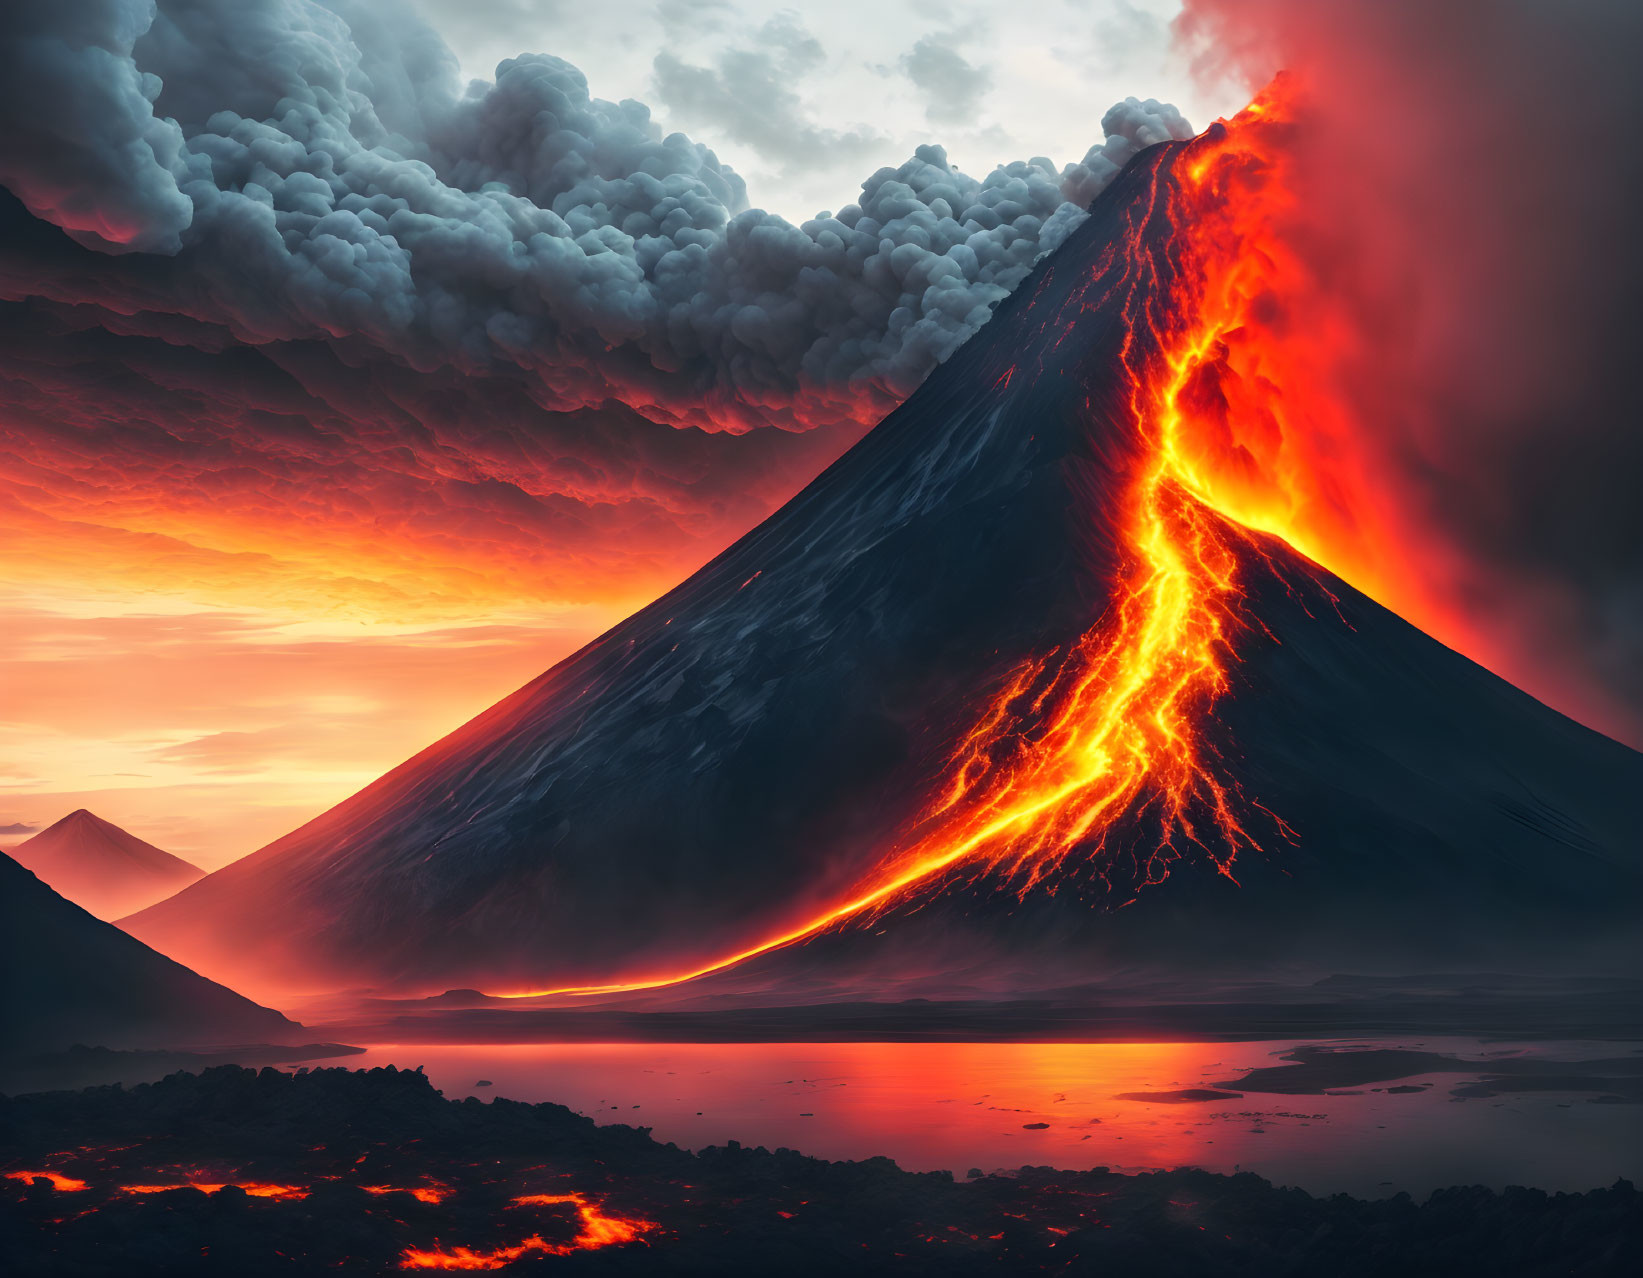 Nighttime volcano eruption with molten lava and smoke against dark sky